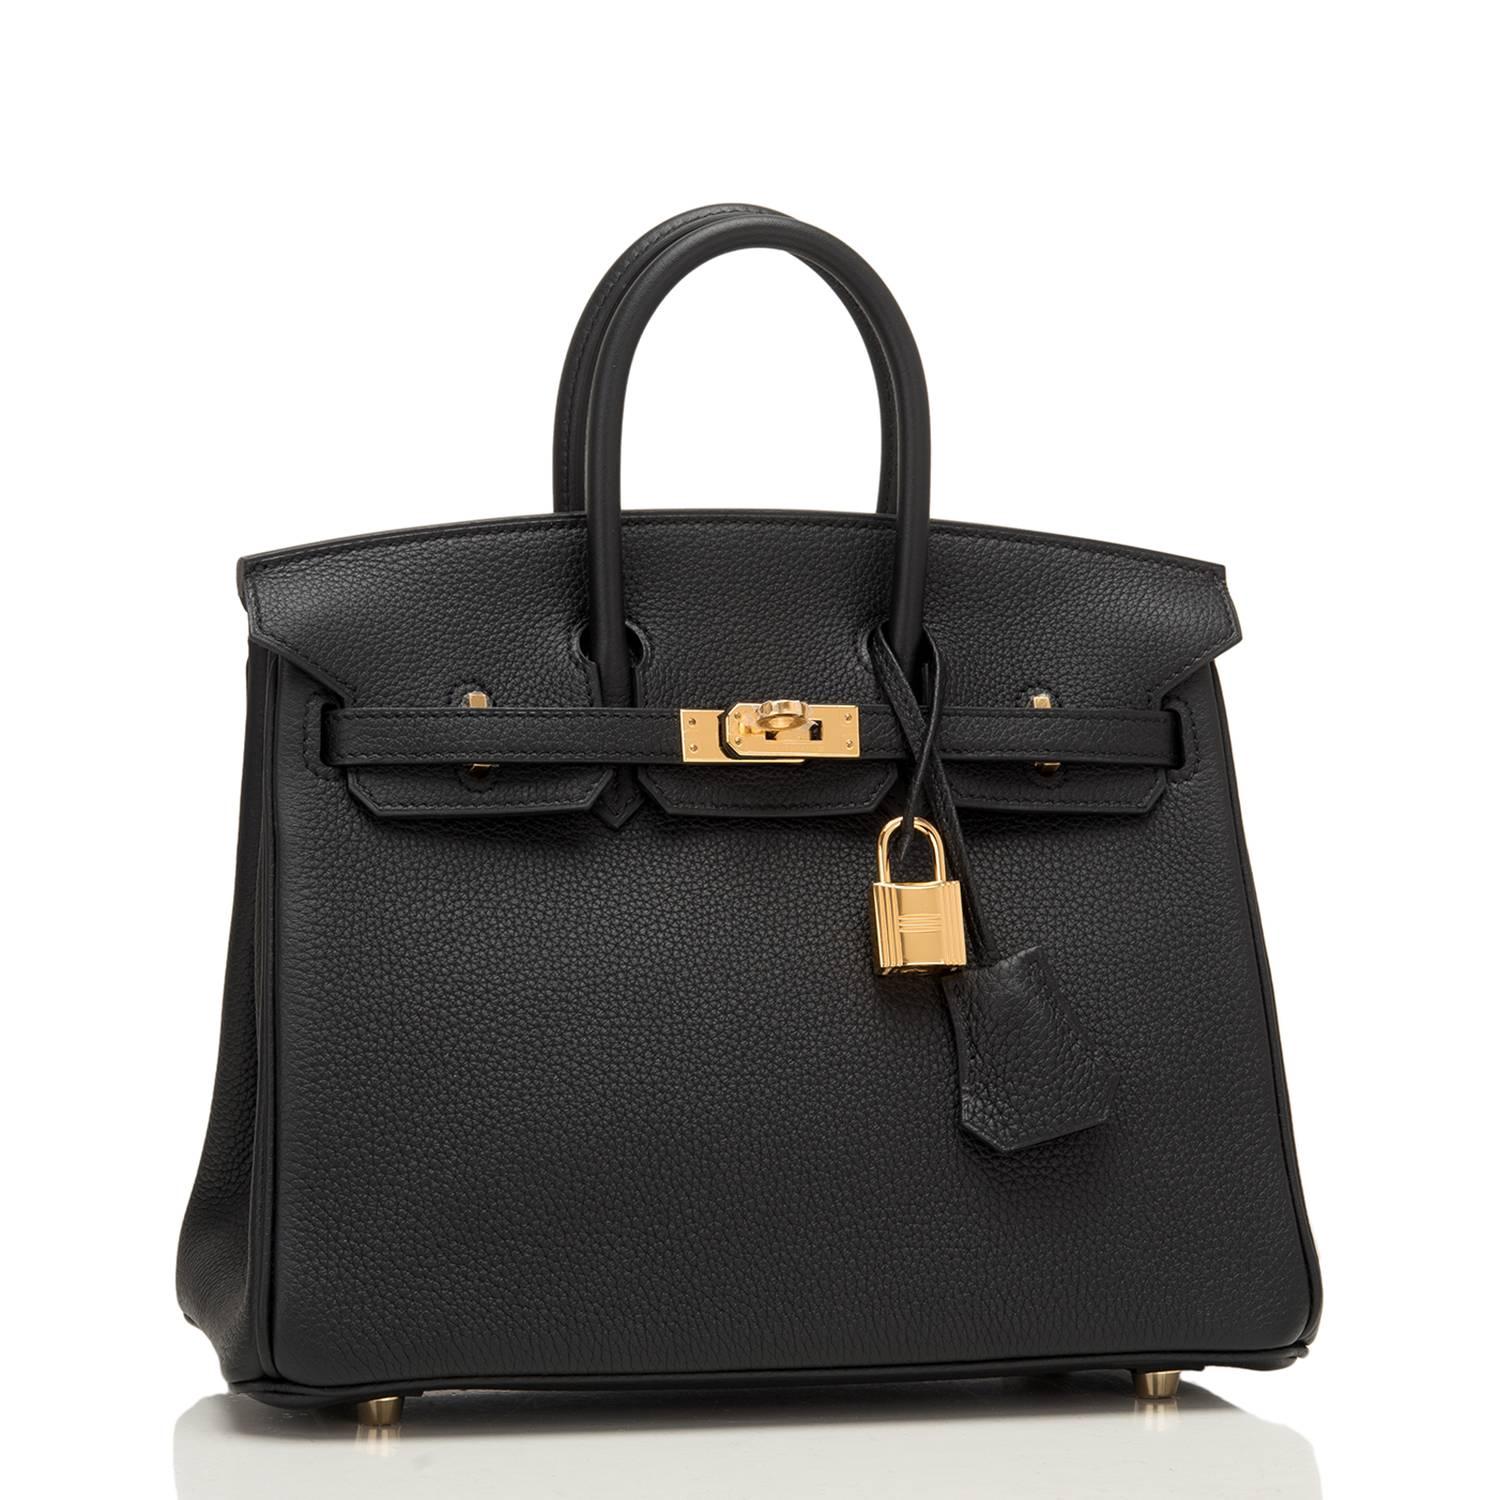 Hermes Black Birkin 25cm of togo leather with gold hardware.

This Birkin has tonal stitching, a front toggle closure, a clochette with lock and two keys, and double rolled handles.

The interior is lined with black chevre and has a zip pocket with